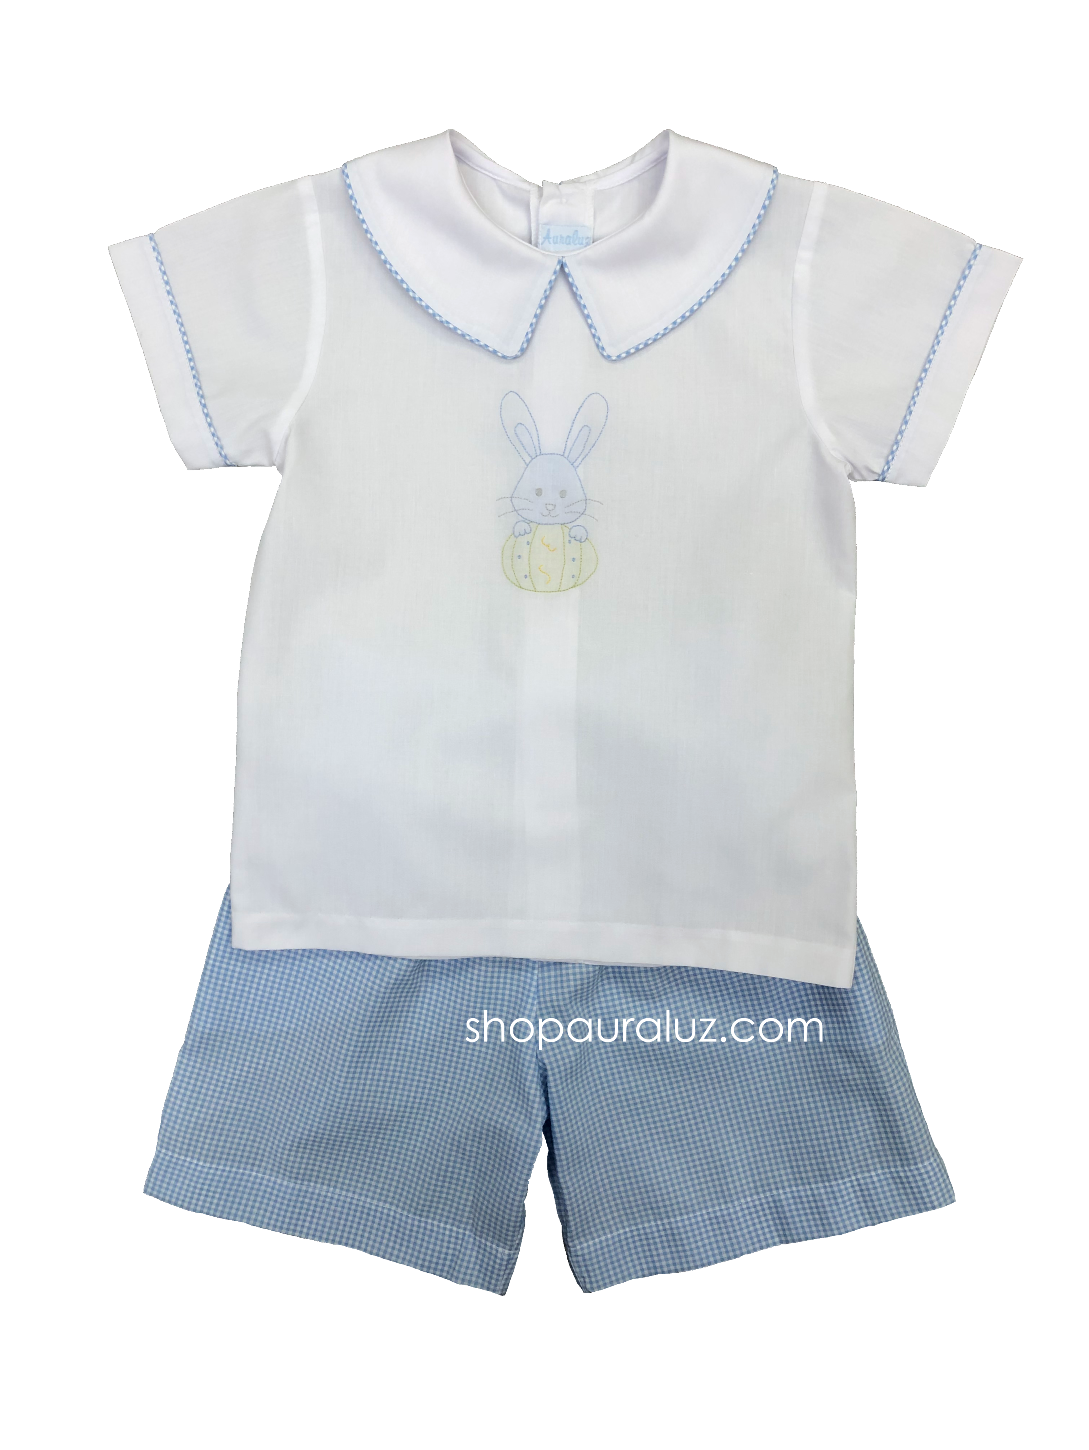 Auraluz Boy 2pc...White/blue check with boy collar and embroidered bunny